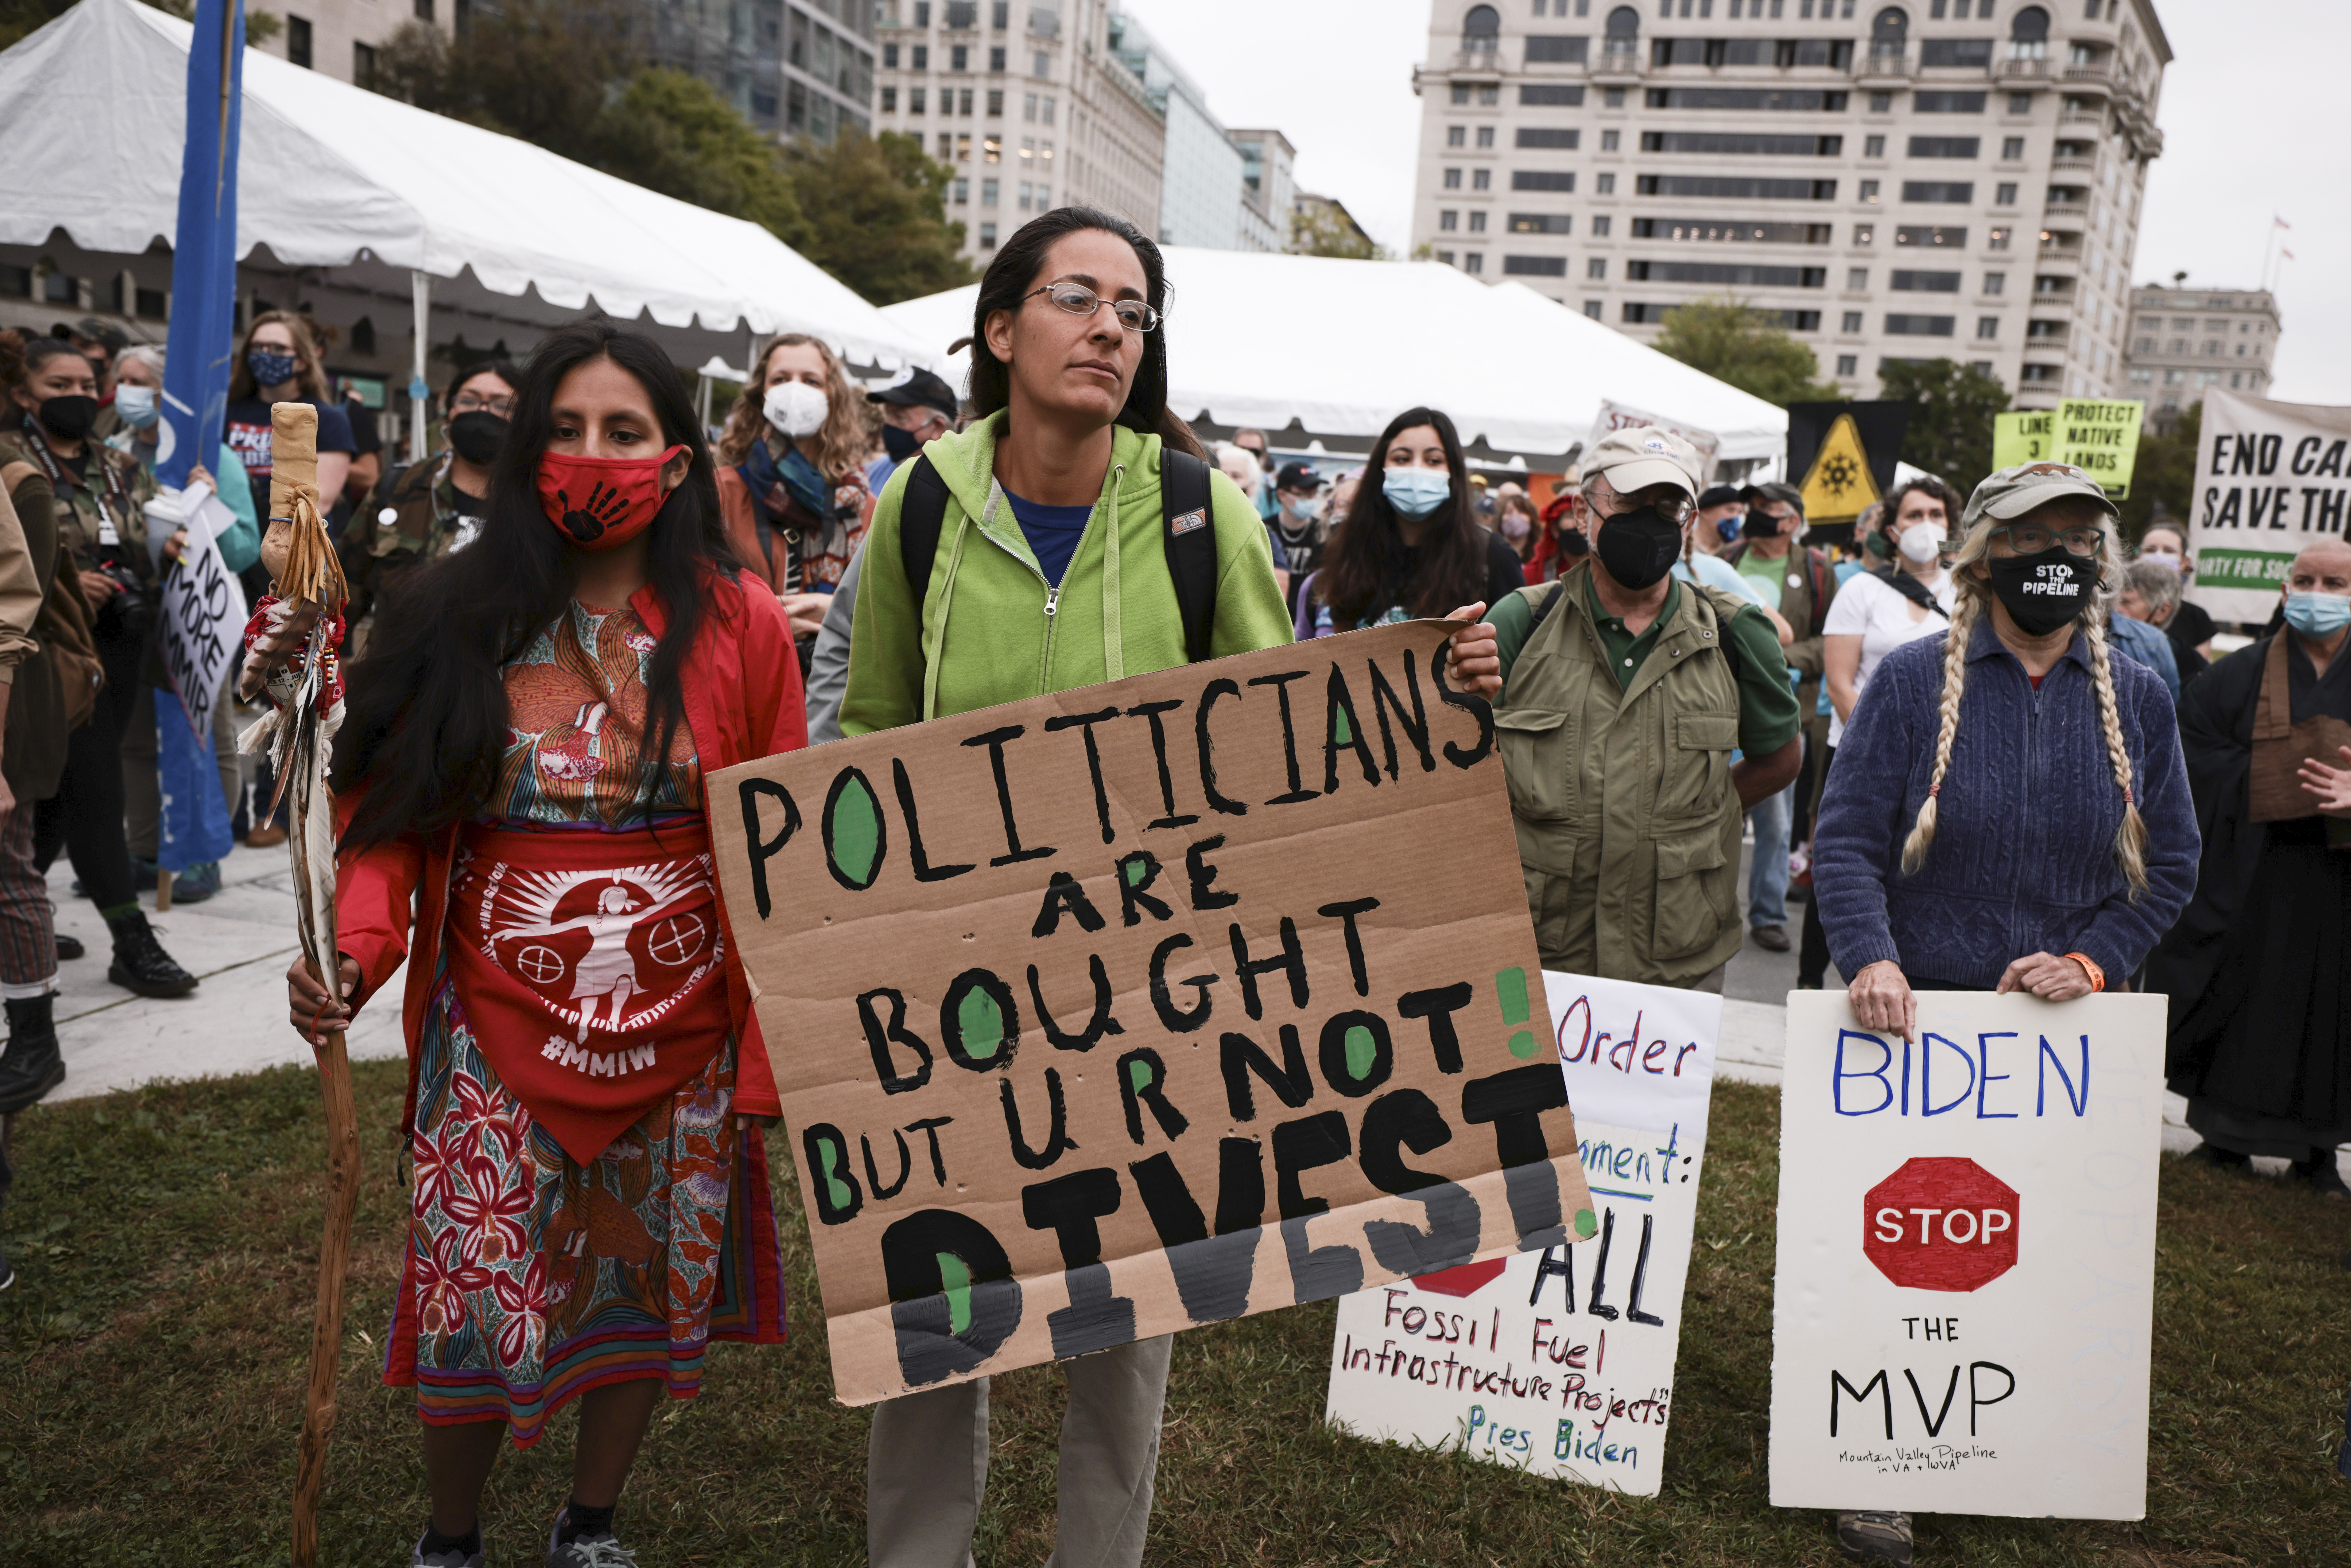 Demonstrators hold signs as they listen to speakers during a climate march on Oct. 11. (Anna Moneymaker/Getty Images)